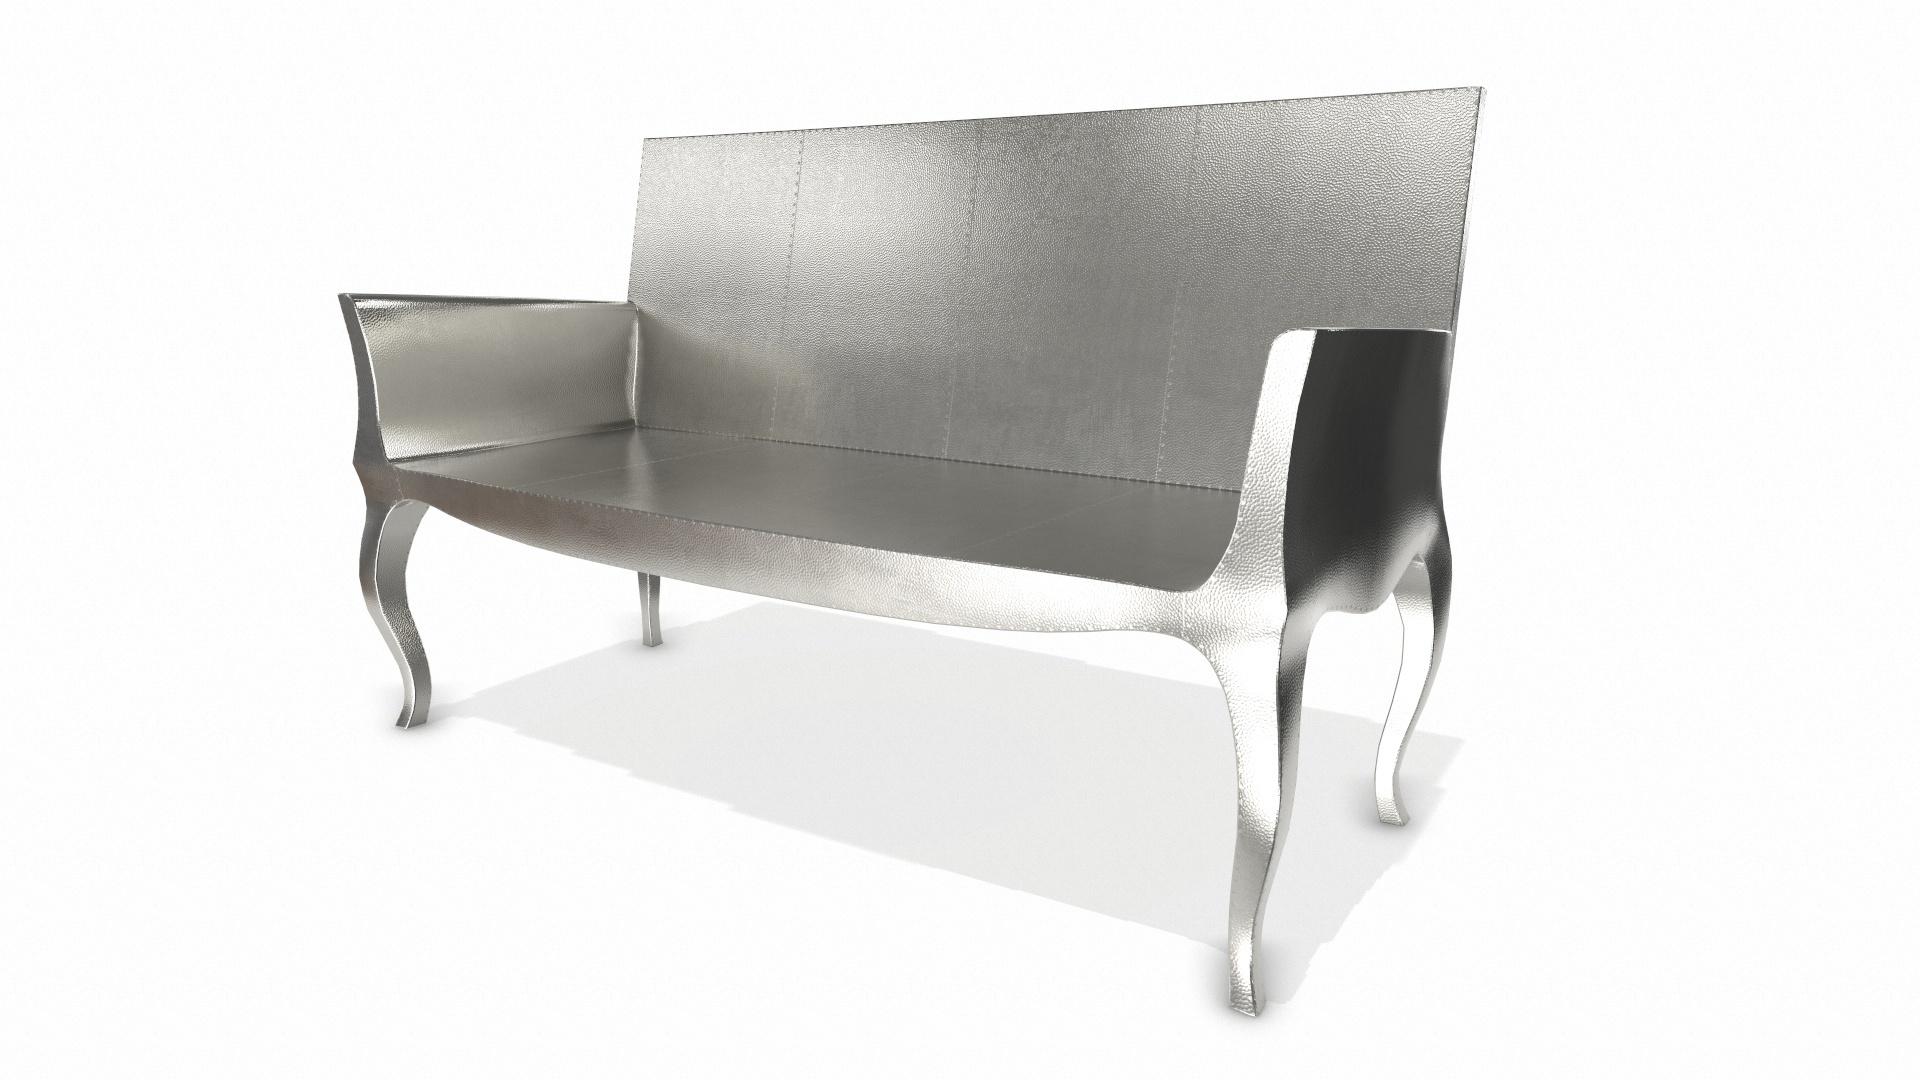 American Louise Settee Art Deco Settees in Mid. Hammered White Bronze by Paul Mathieu For Sale